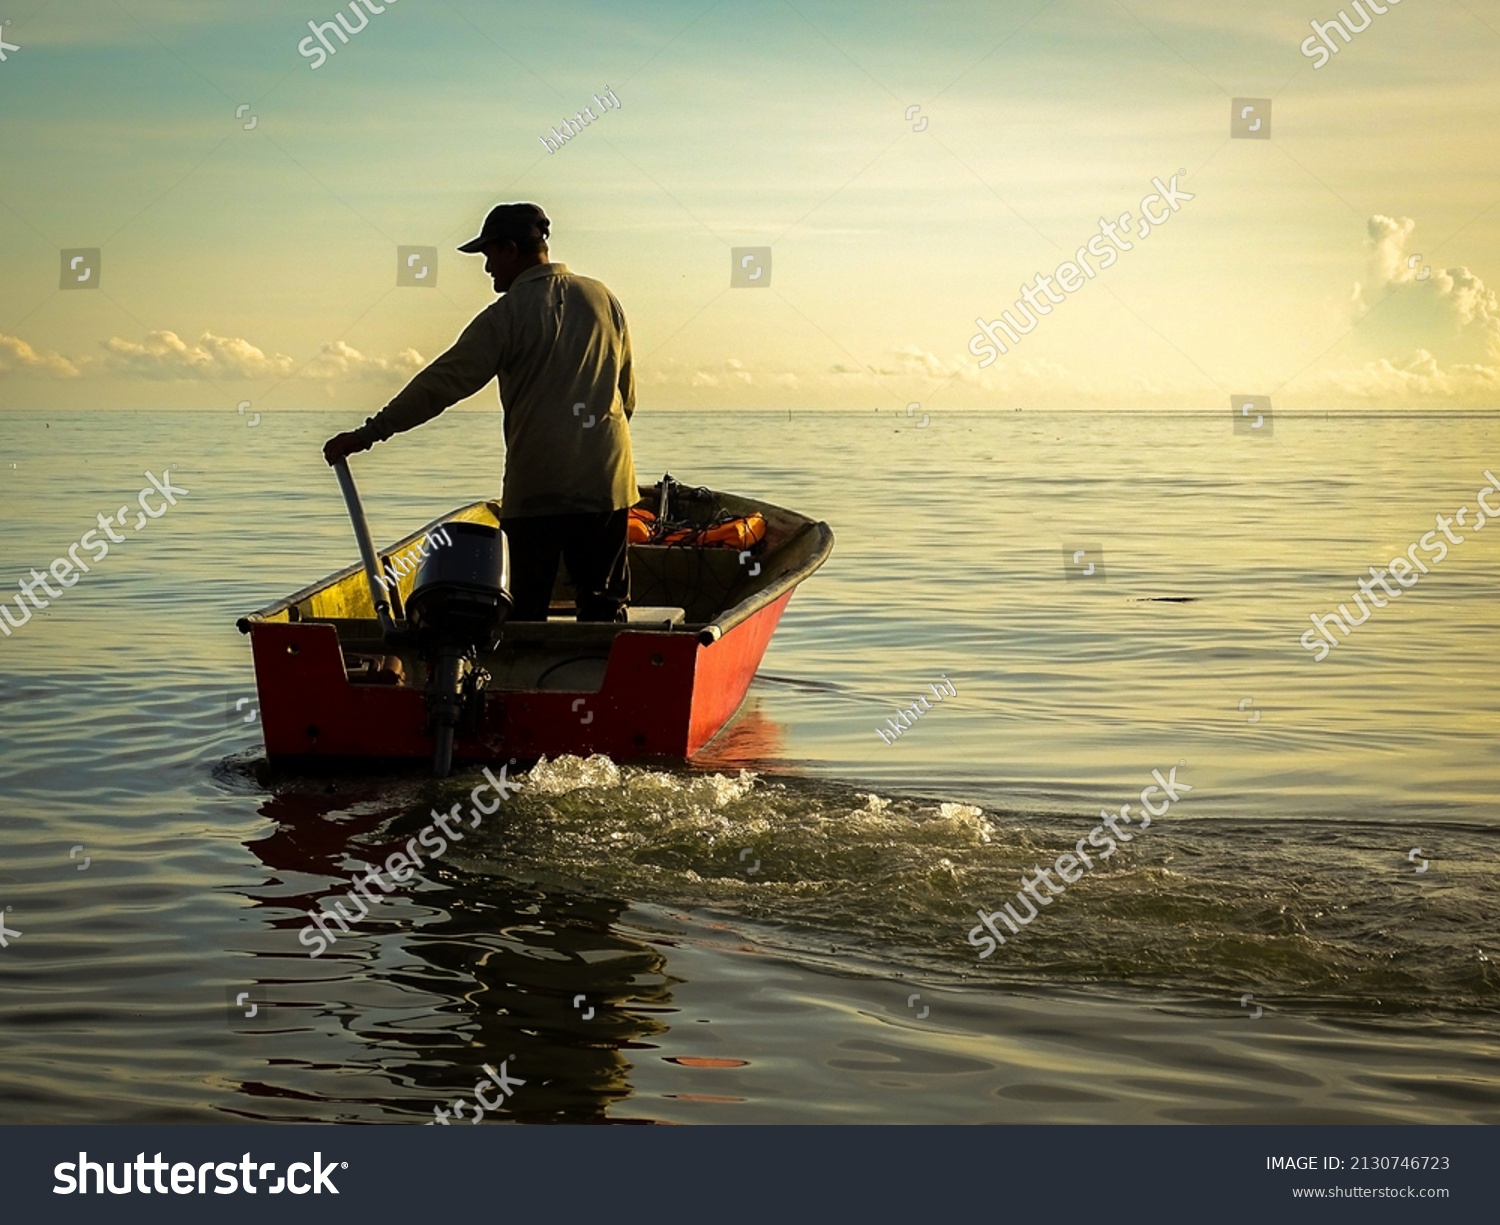 Silhouette of a fishermen on boat with outboard motor boat ready to fishing during beautiful sunrise at Labuan island, Malaysia. #2130746723